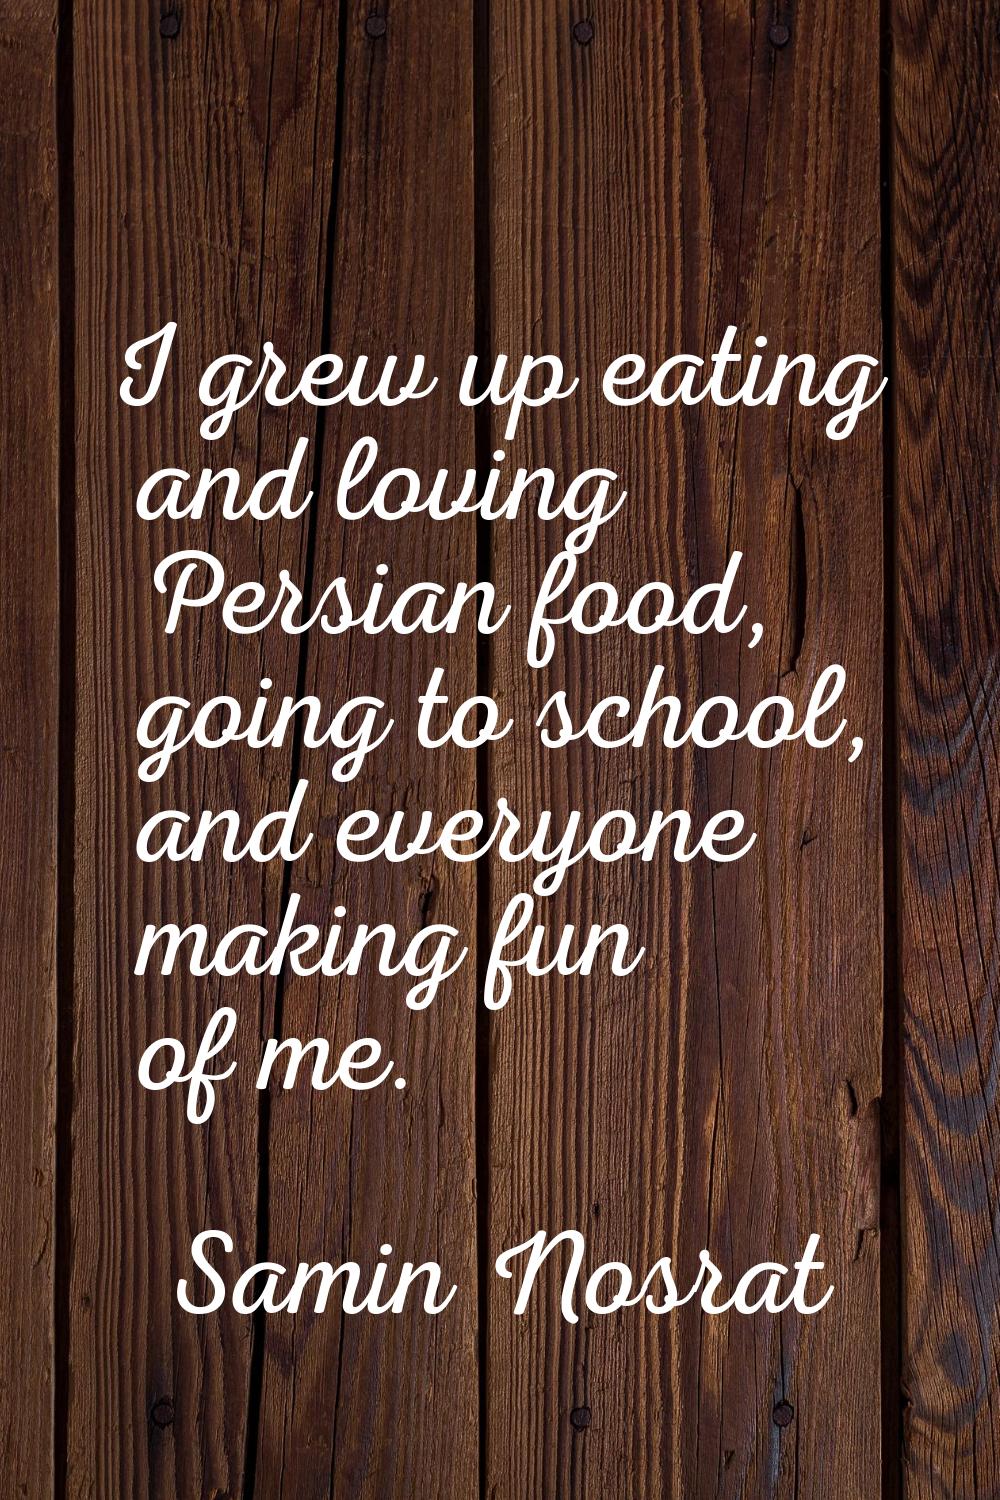 I grew up eating and loving Persian food, going to school, and everyone making fun of me.